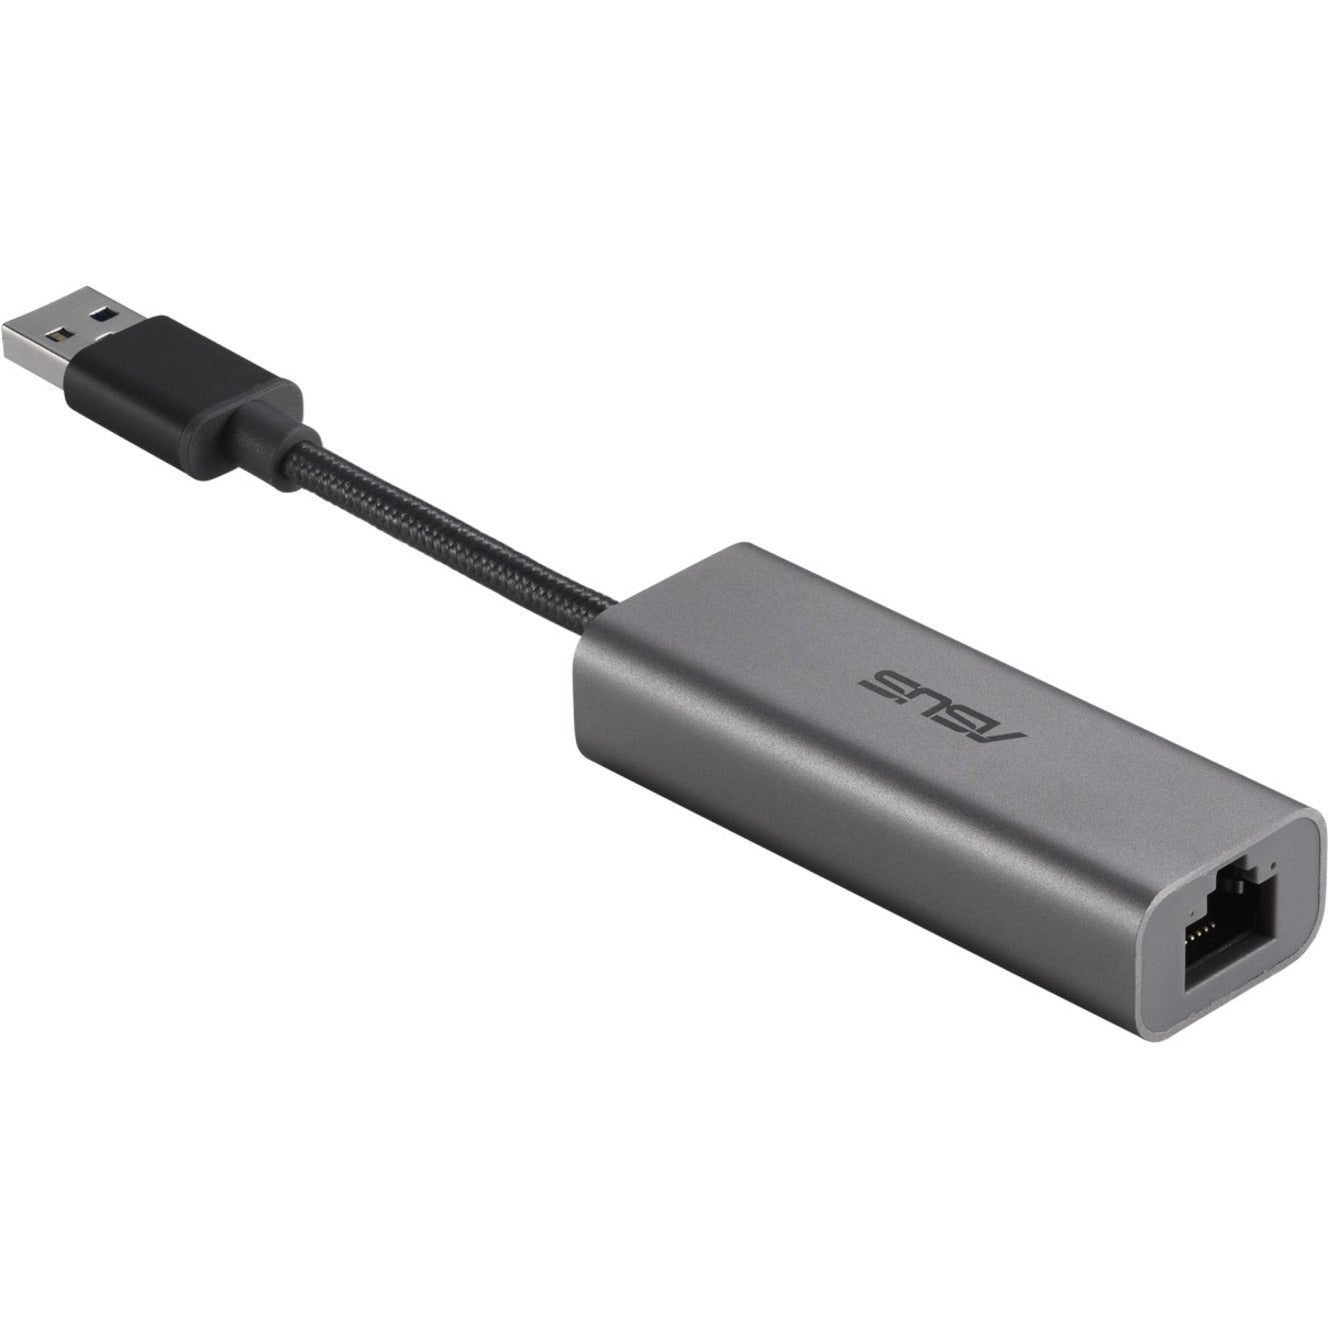 Asus USB-C2500 2.5Gigabit Ethernet Adapter, High-Speed Internet Connection for NAS Storage Device/Computer/Notebook